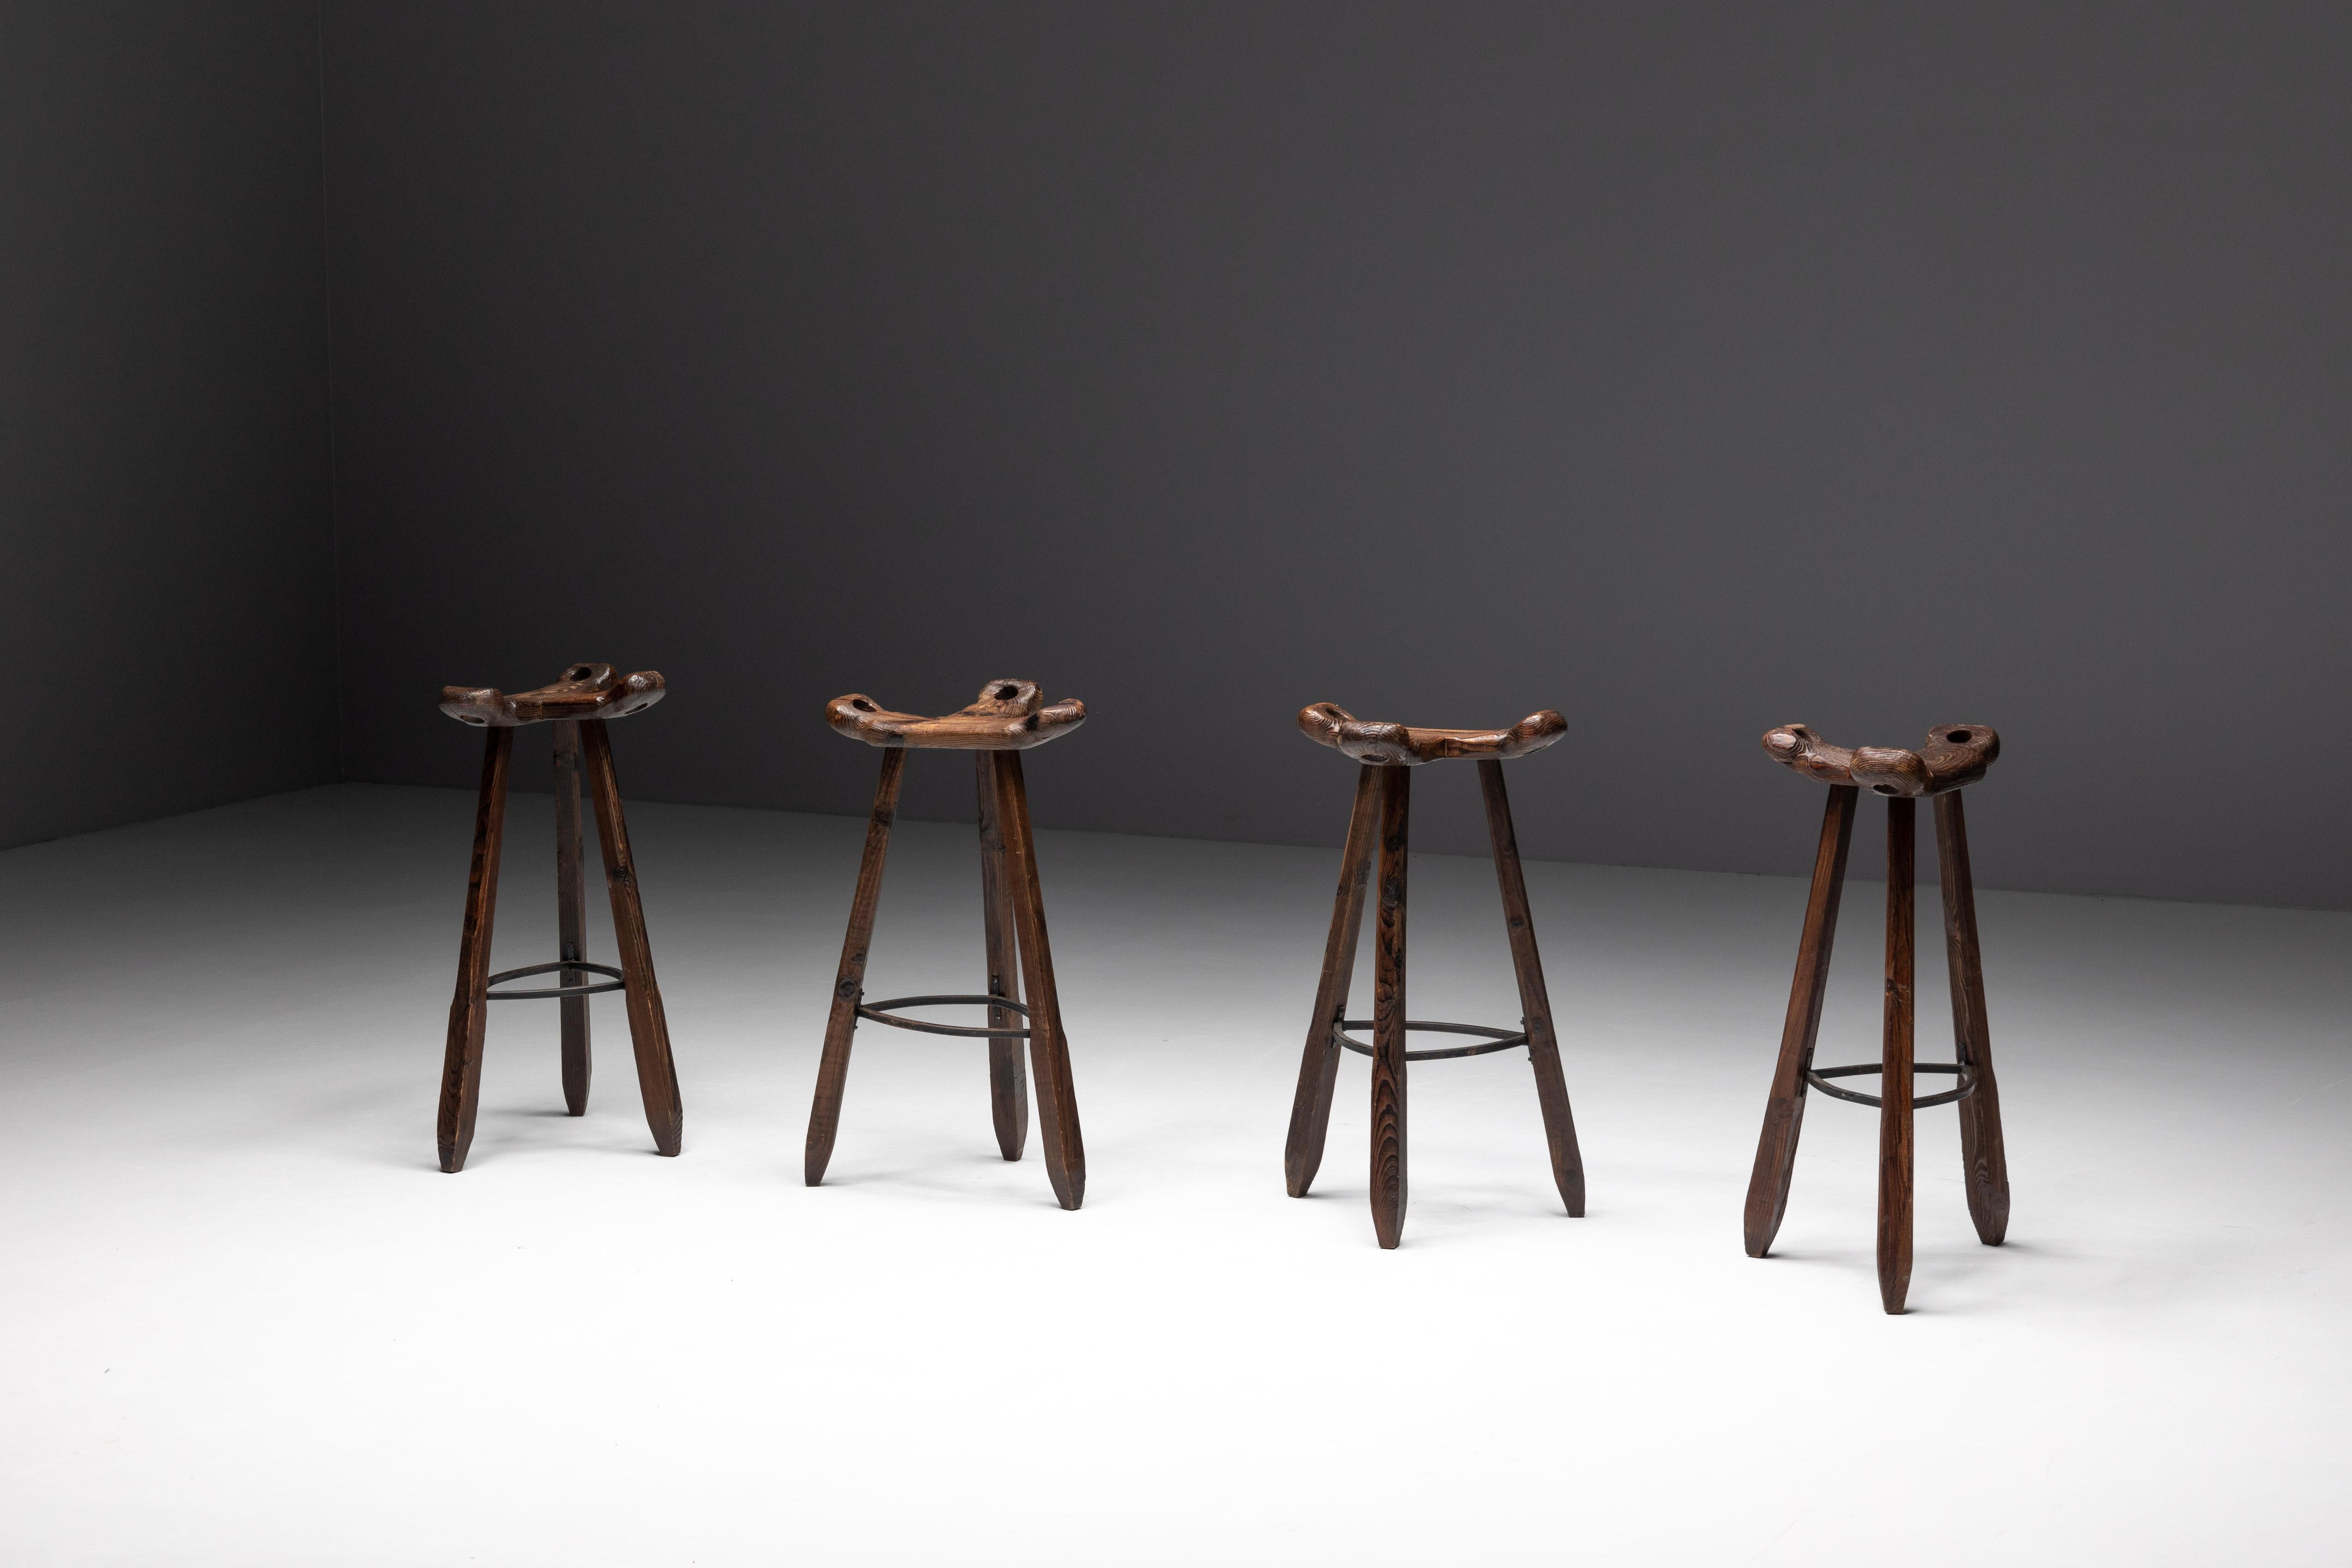 Late 20th Century Brutalist Tripod Bar Stools in Spanish Oak, Spain, 1970s For Sale